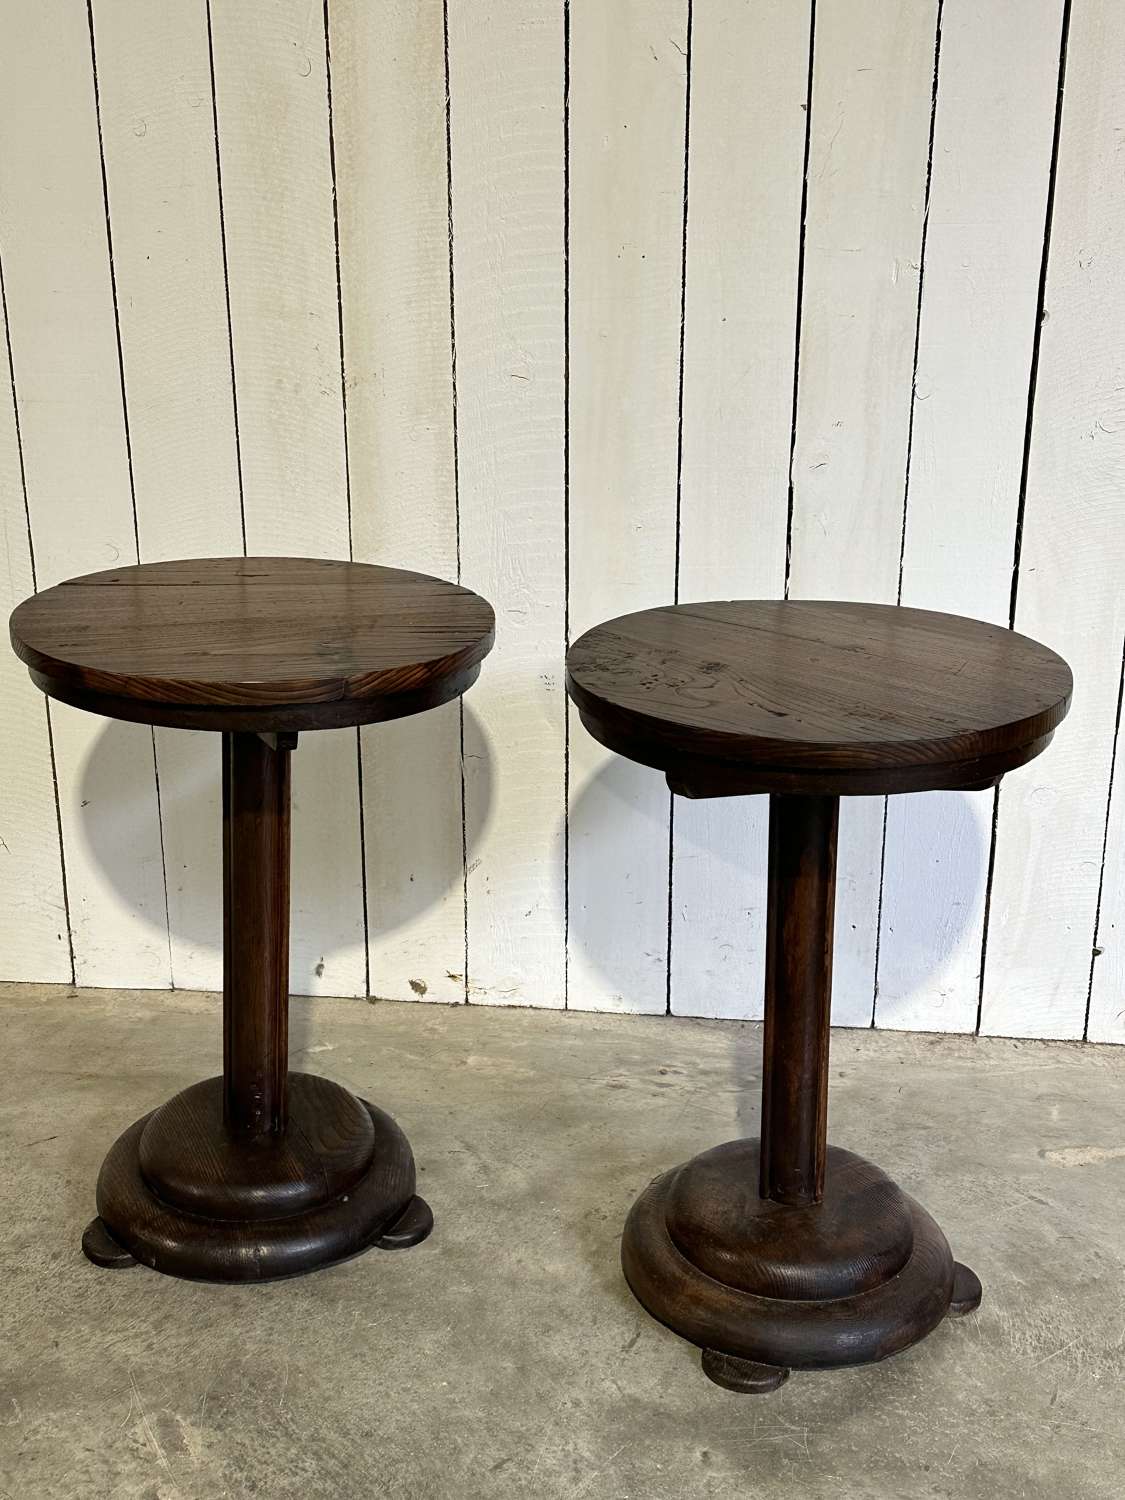 A pair of 19th century walnut tables